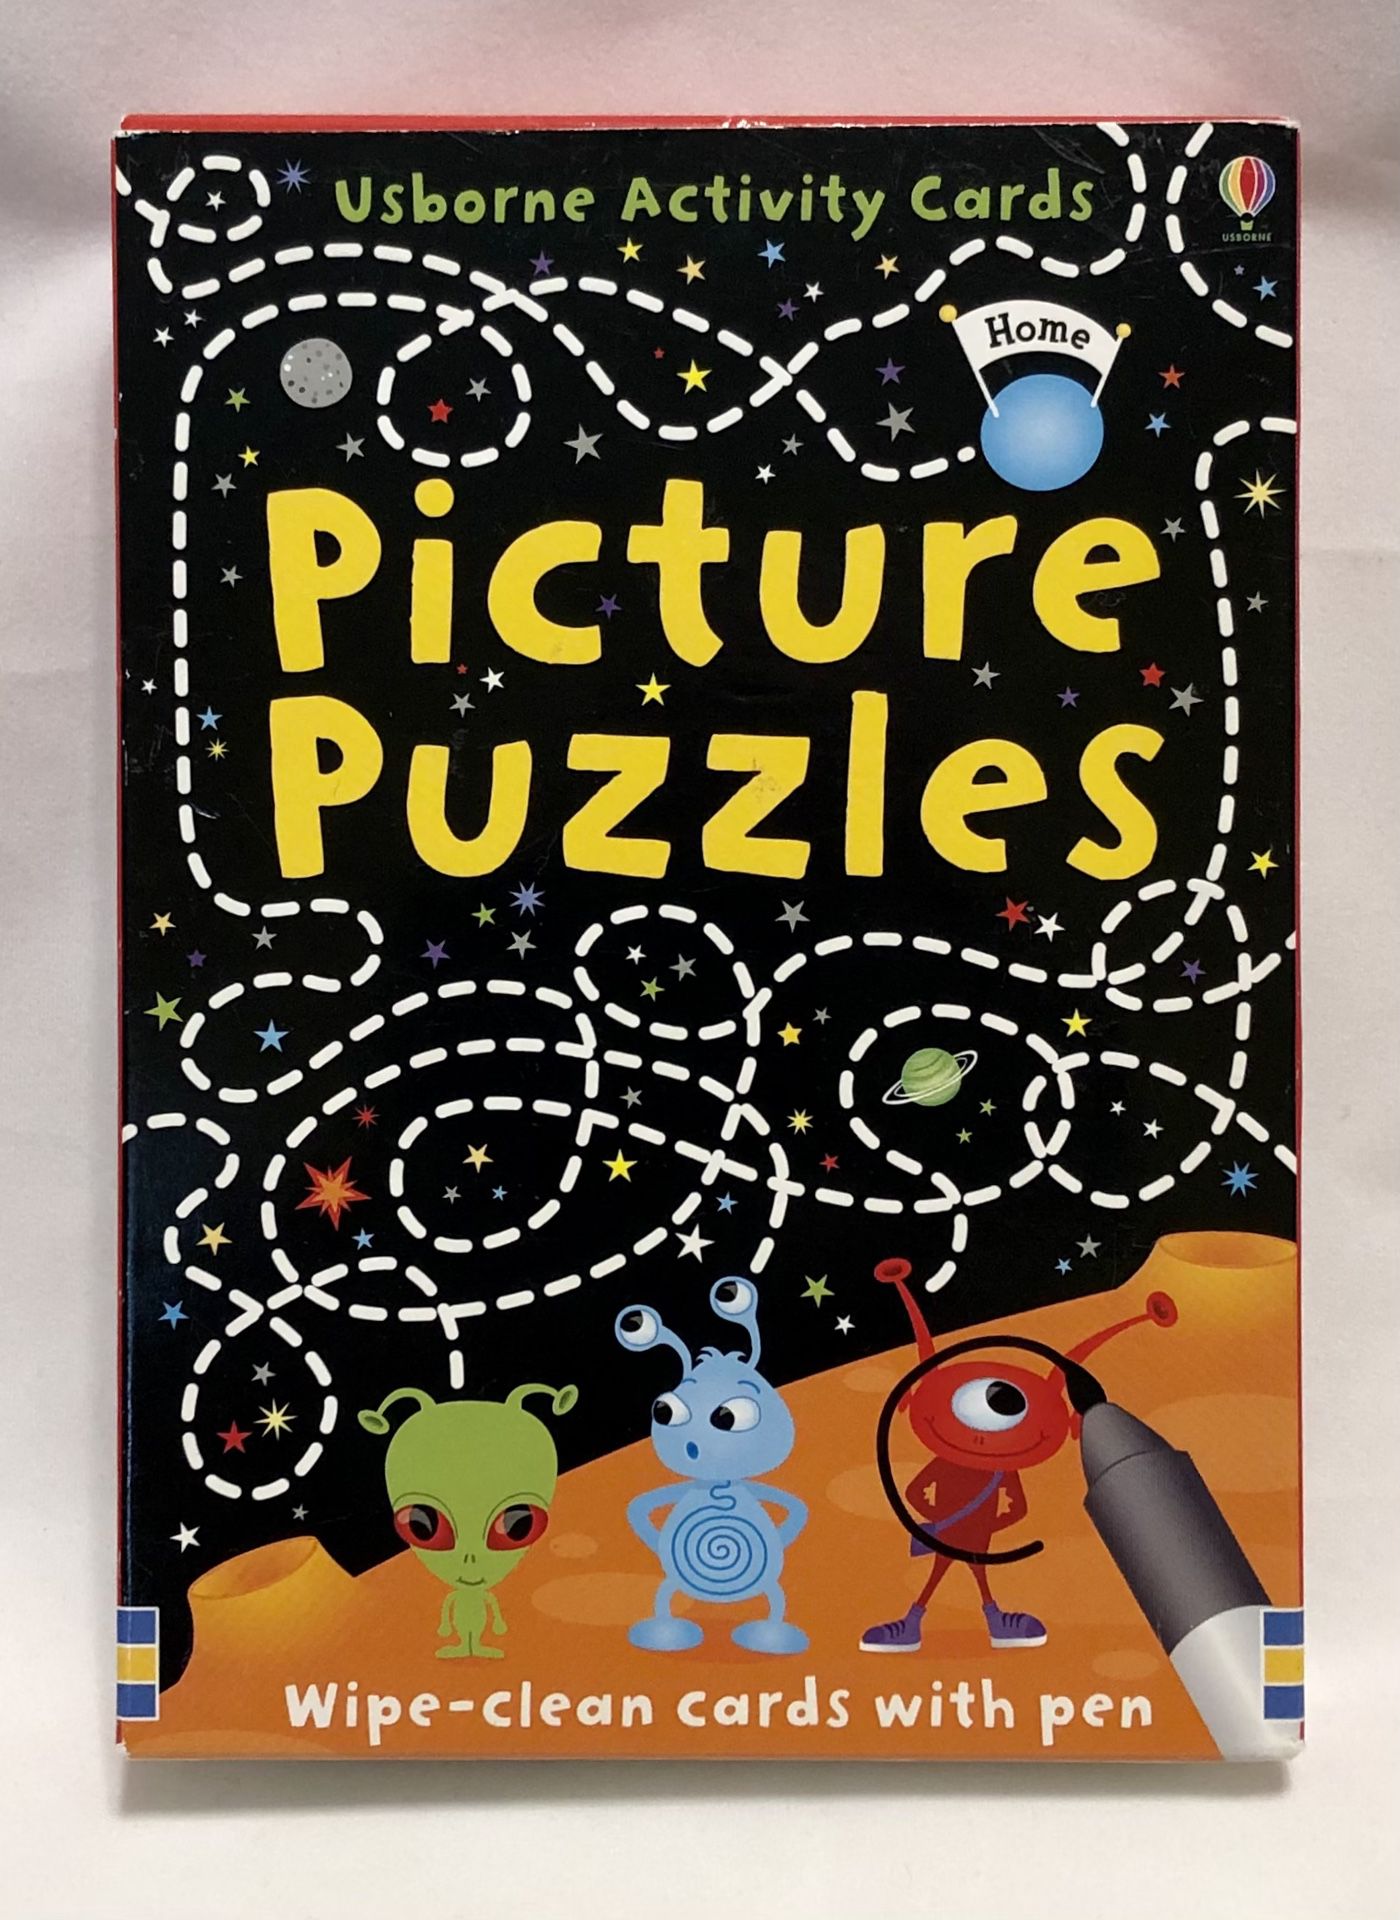 Usborne Activity Cards - PICTURE PUZZLES Wipe Clean & Reuse Games & Puzzles NEW!